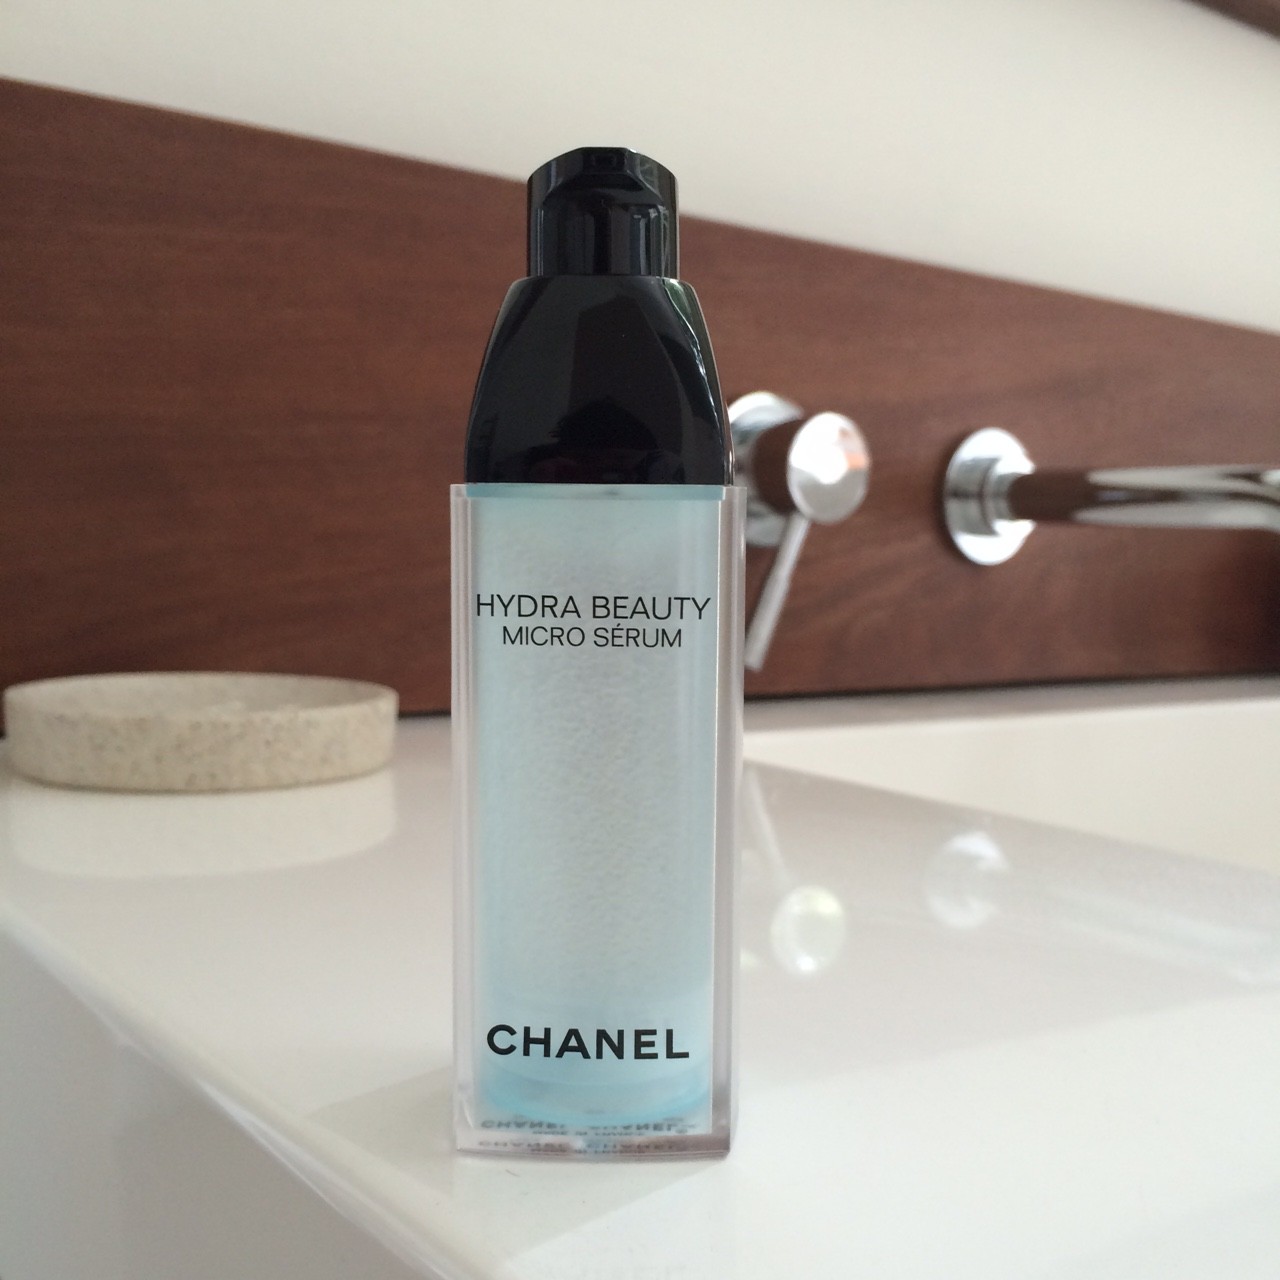 CHANEL HYDRA BEAUTY MICRO SERUM REVIEW – In My Bag